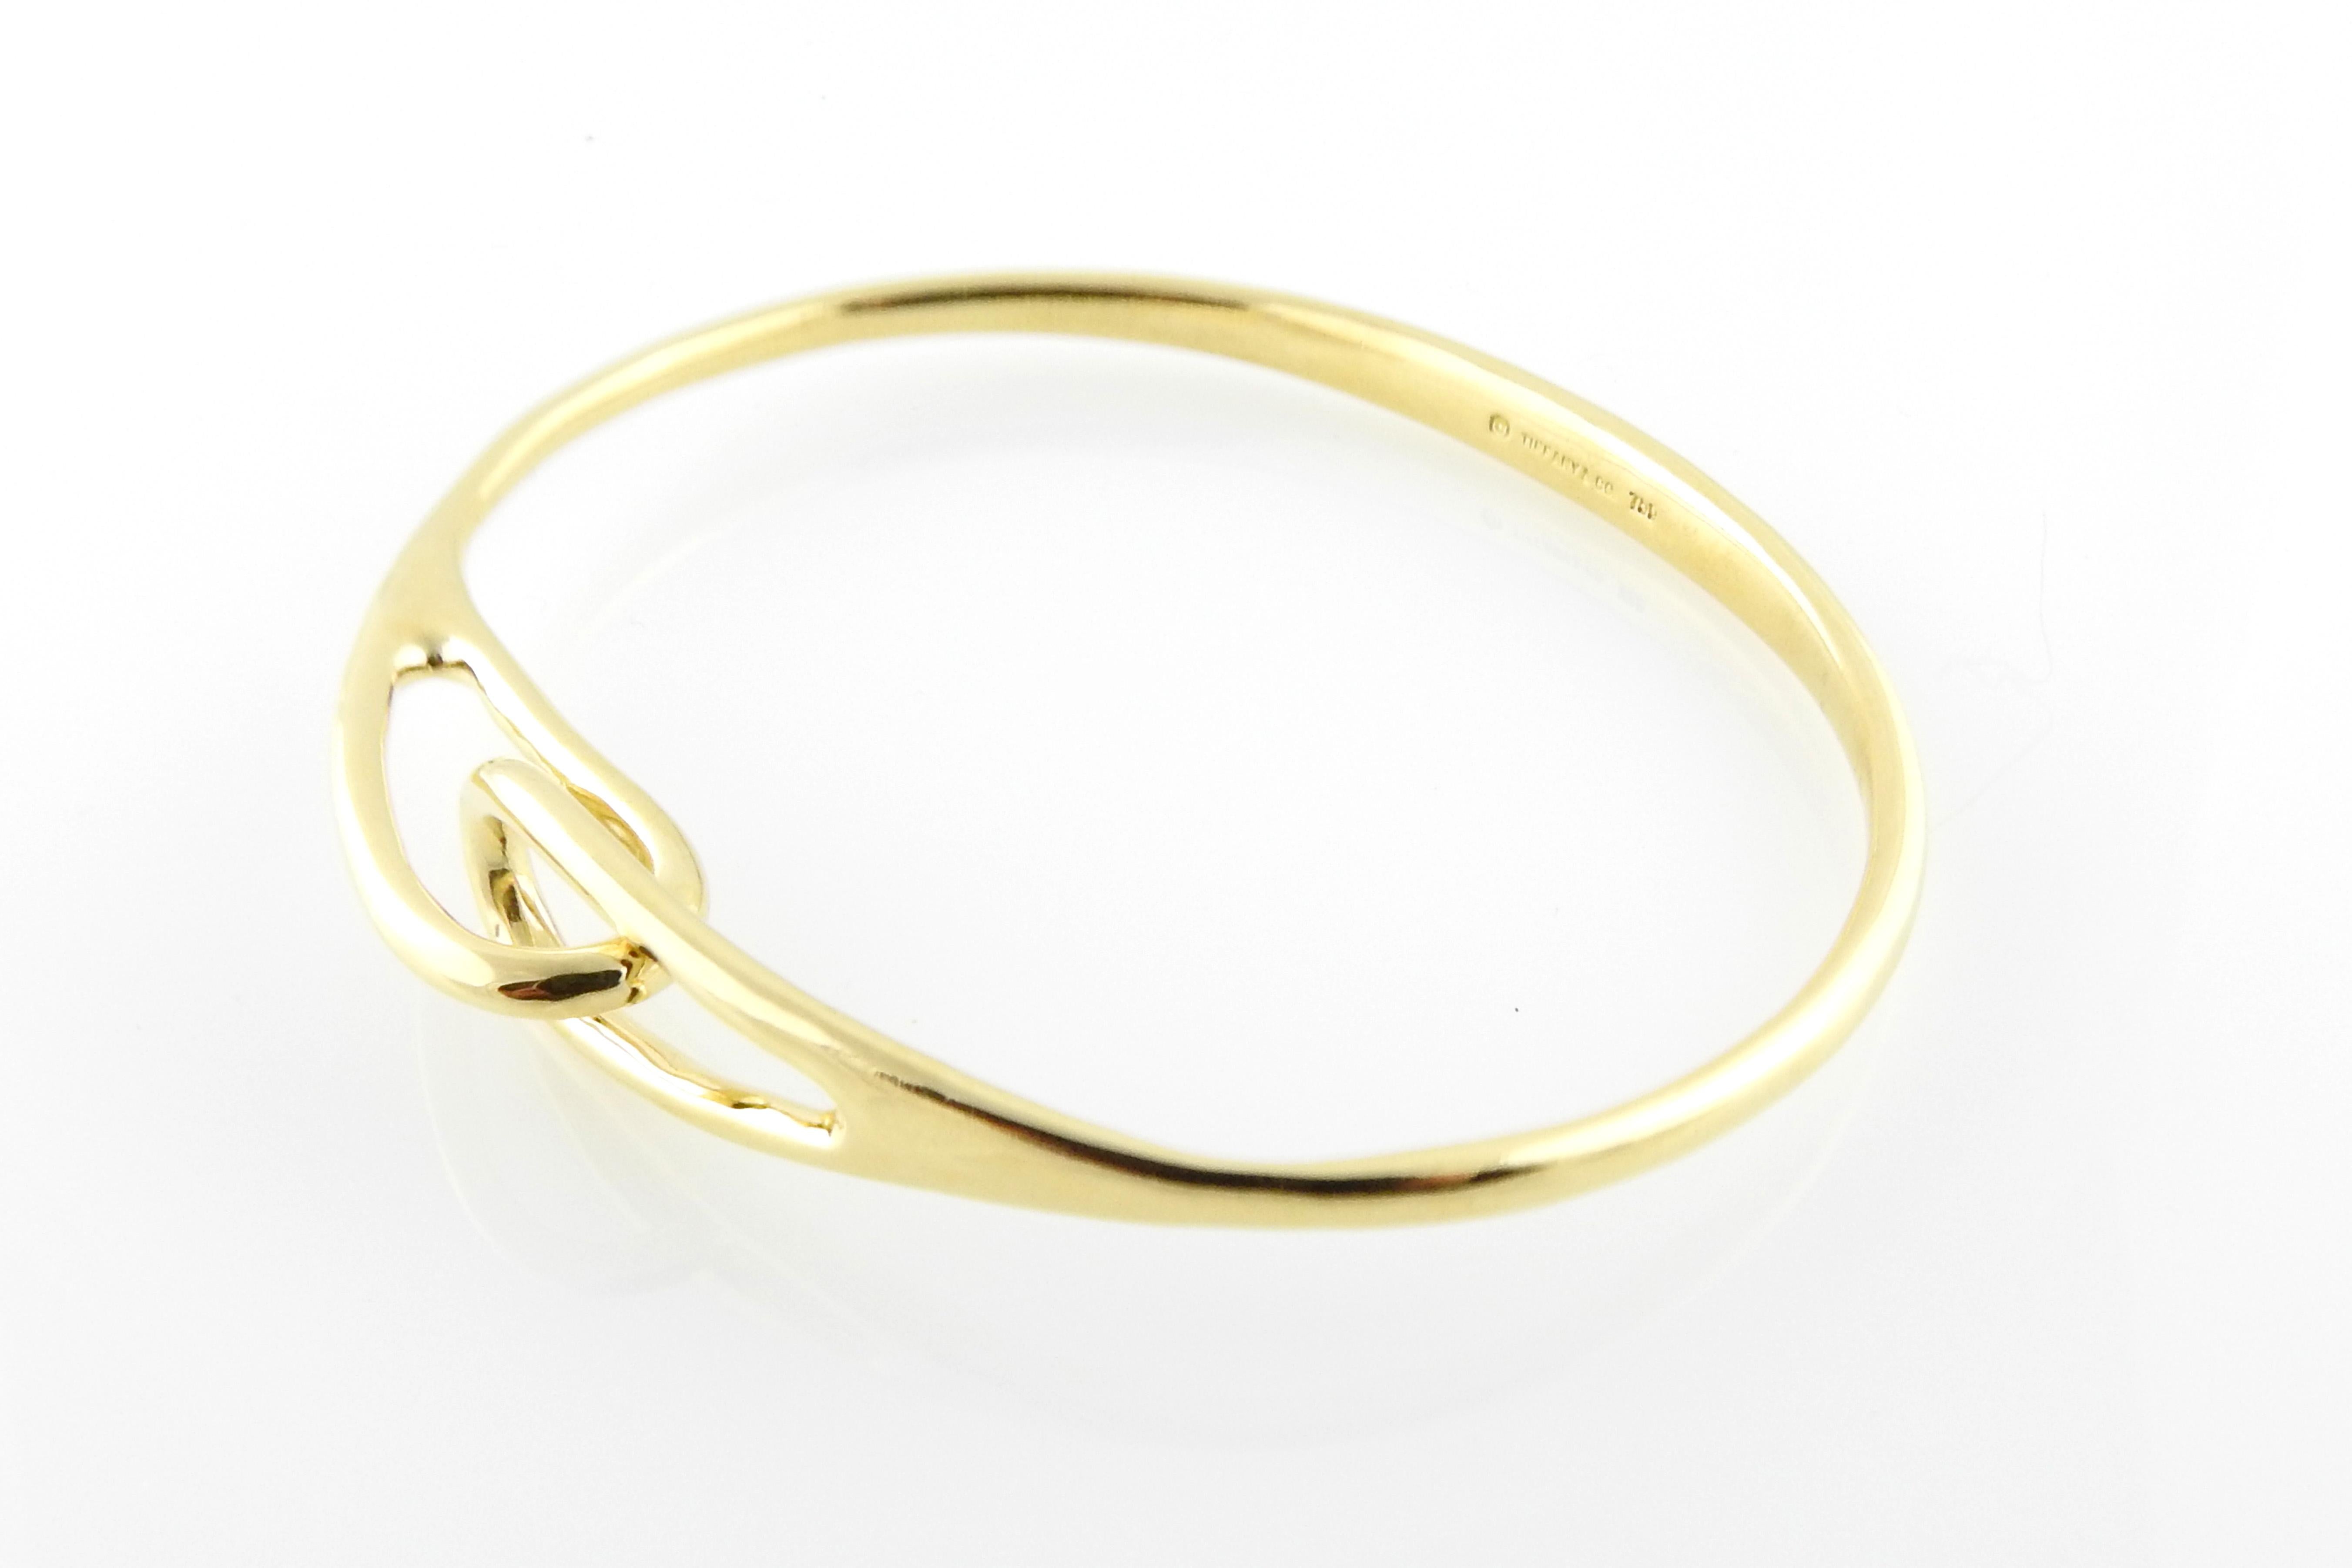 Tiffany & Co. 18K Yellow Gold Interlocking Double Loop Bangle

This gorgeous bangle bracelet measure approx. 7